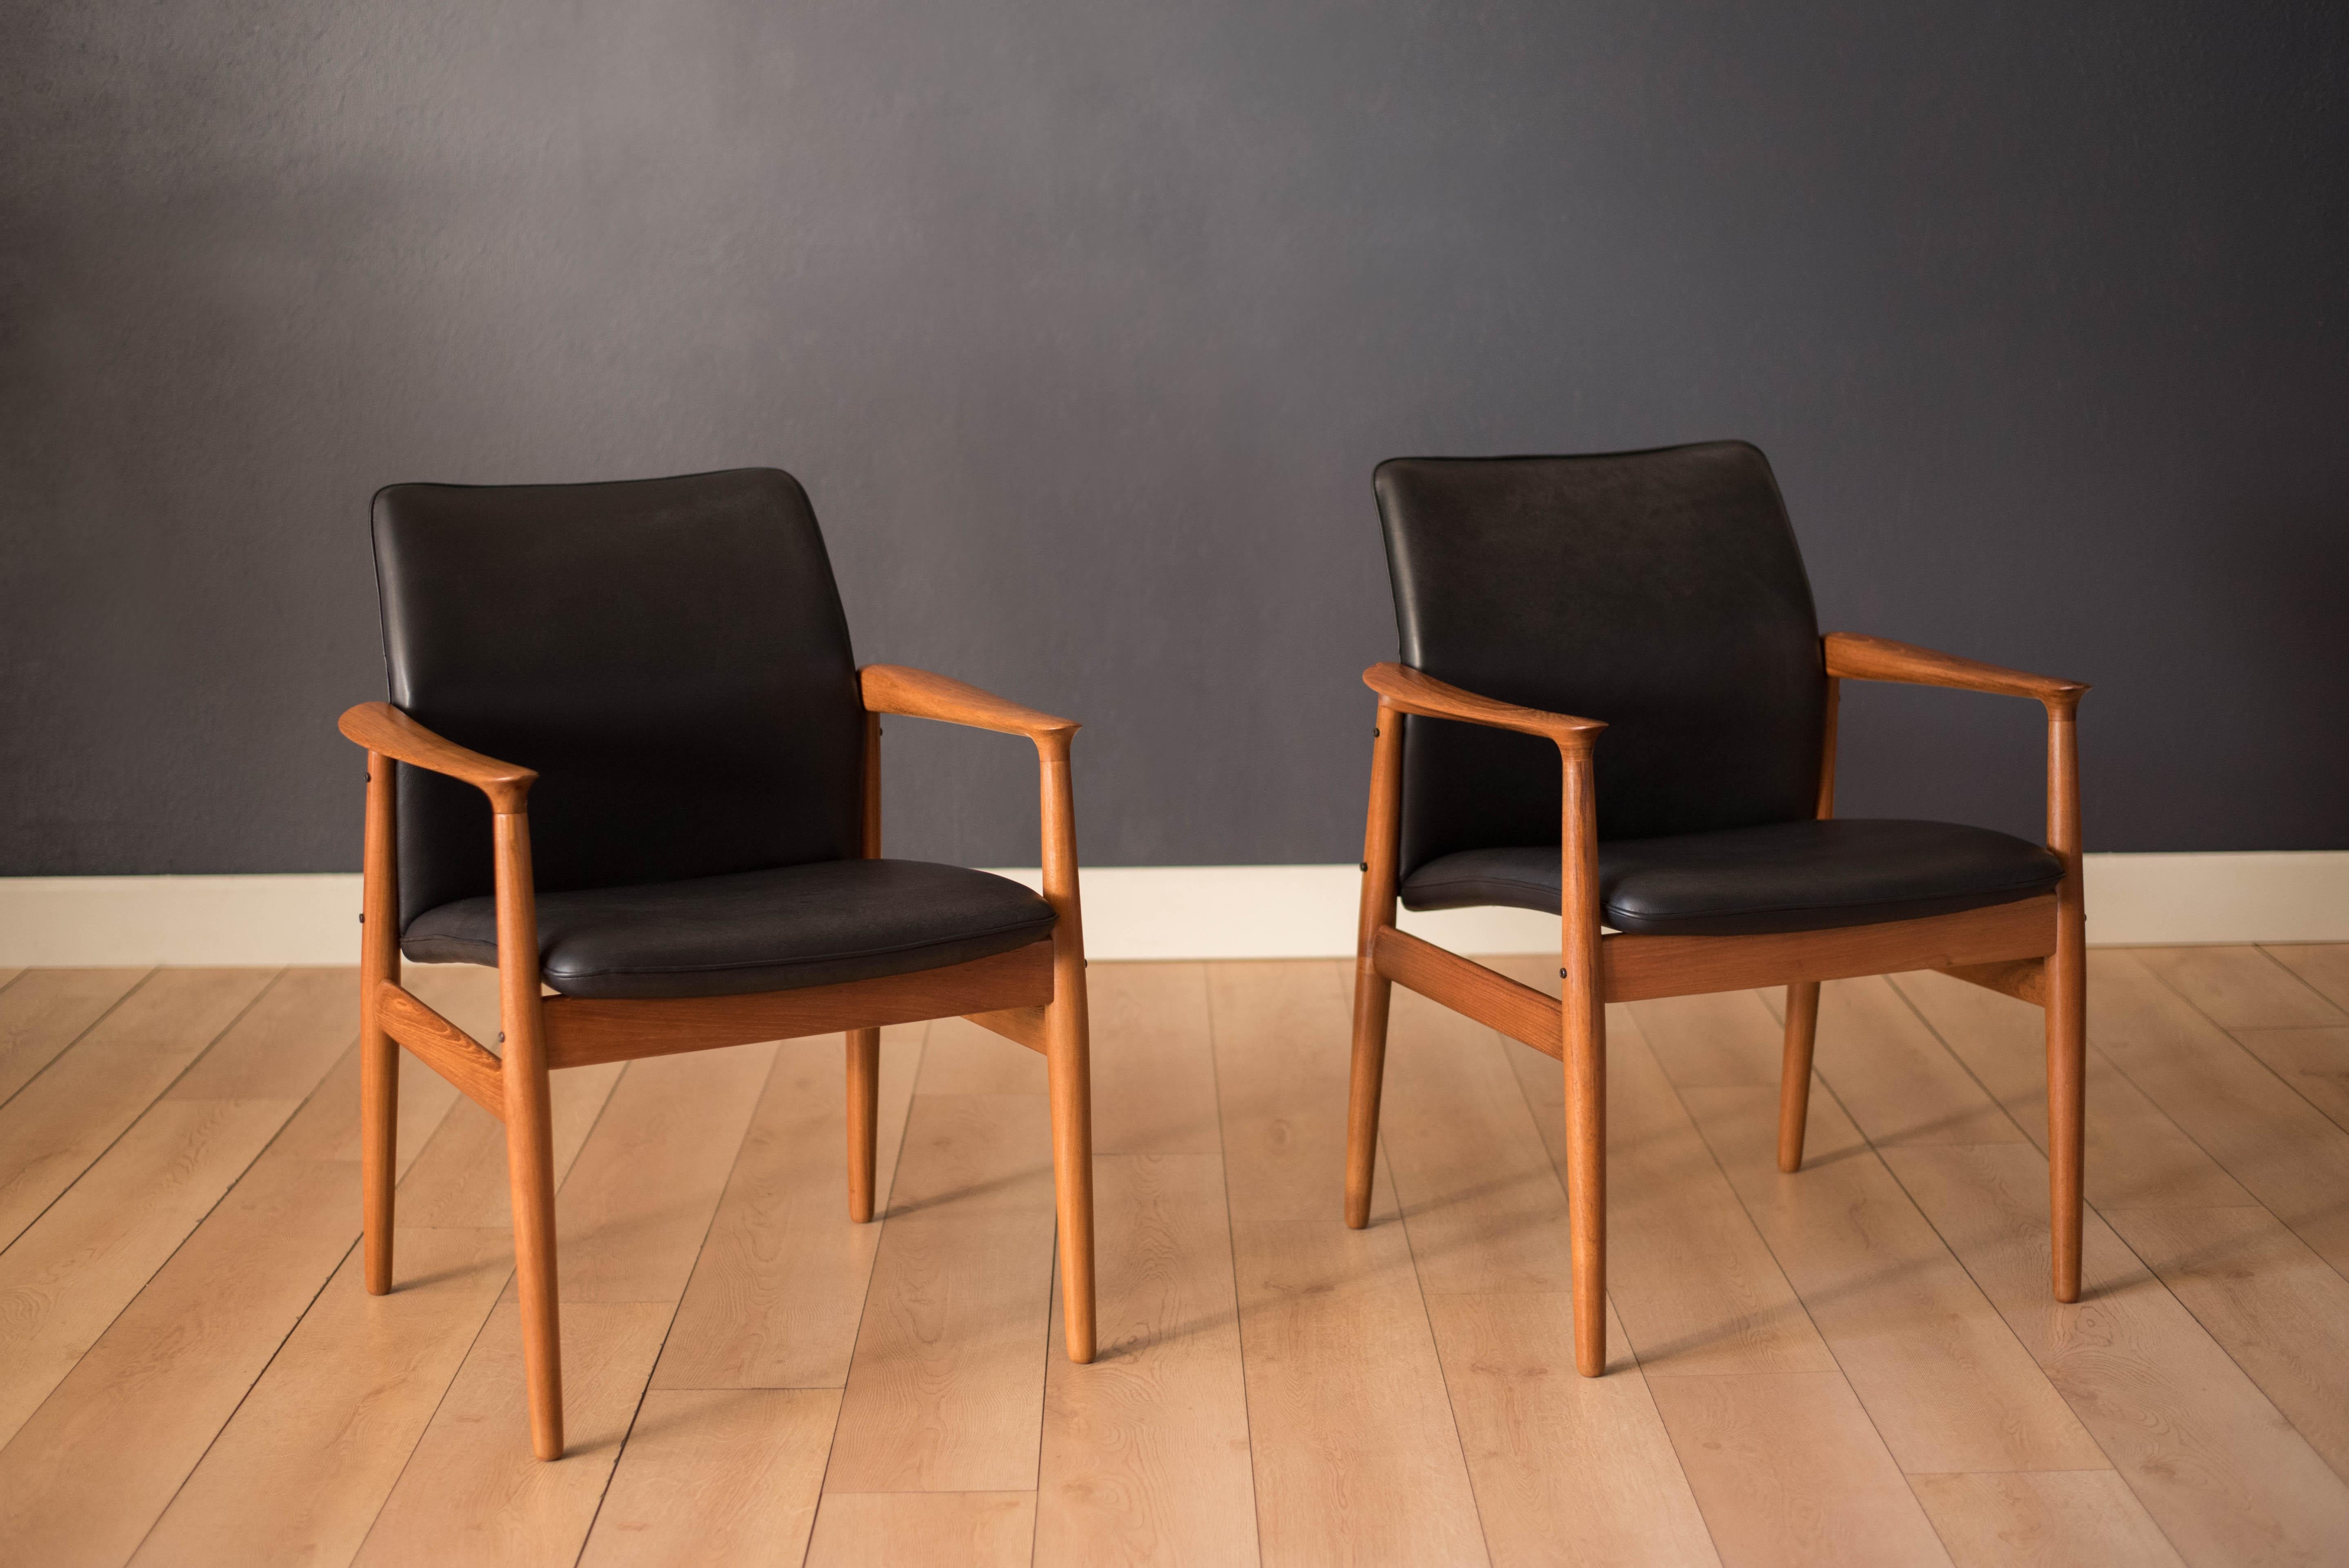 Mid-Century Modern pair of lounge armchairs designed by Grete Jalk for Glostrup Møbelfabrik. This set features sculpted teak arms and a comfortable curved backrest. They have been professionally reupholstered in black leather with brand new foam.